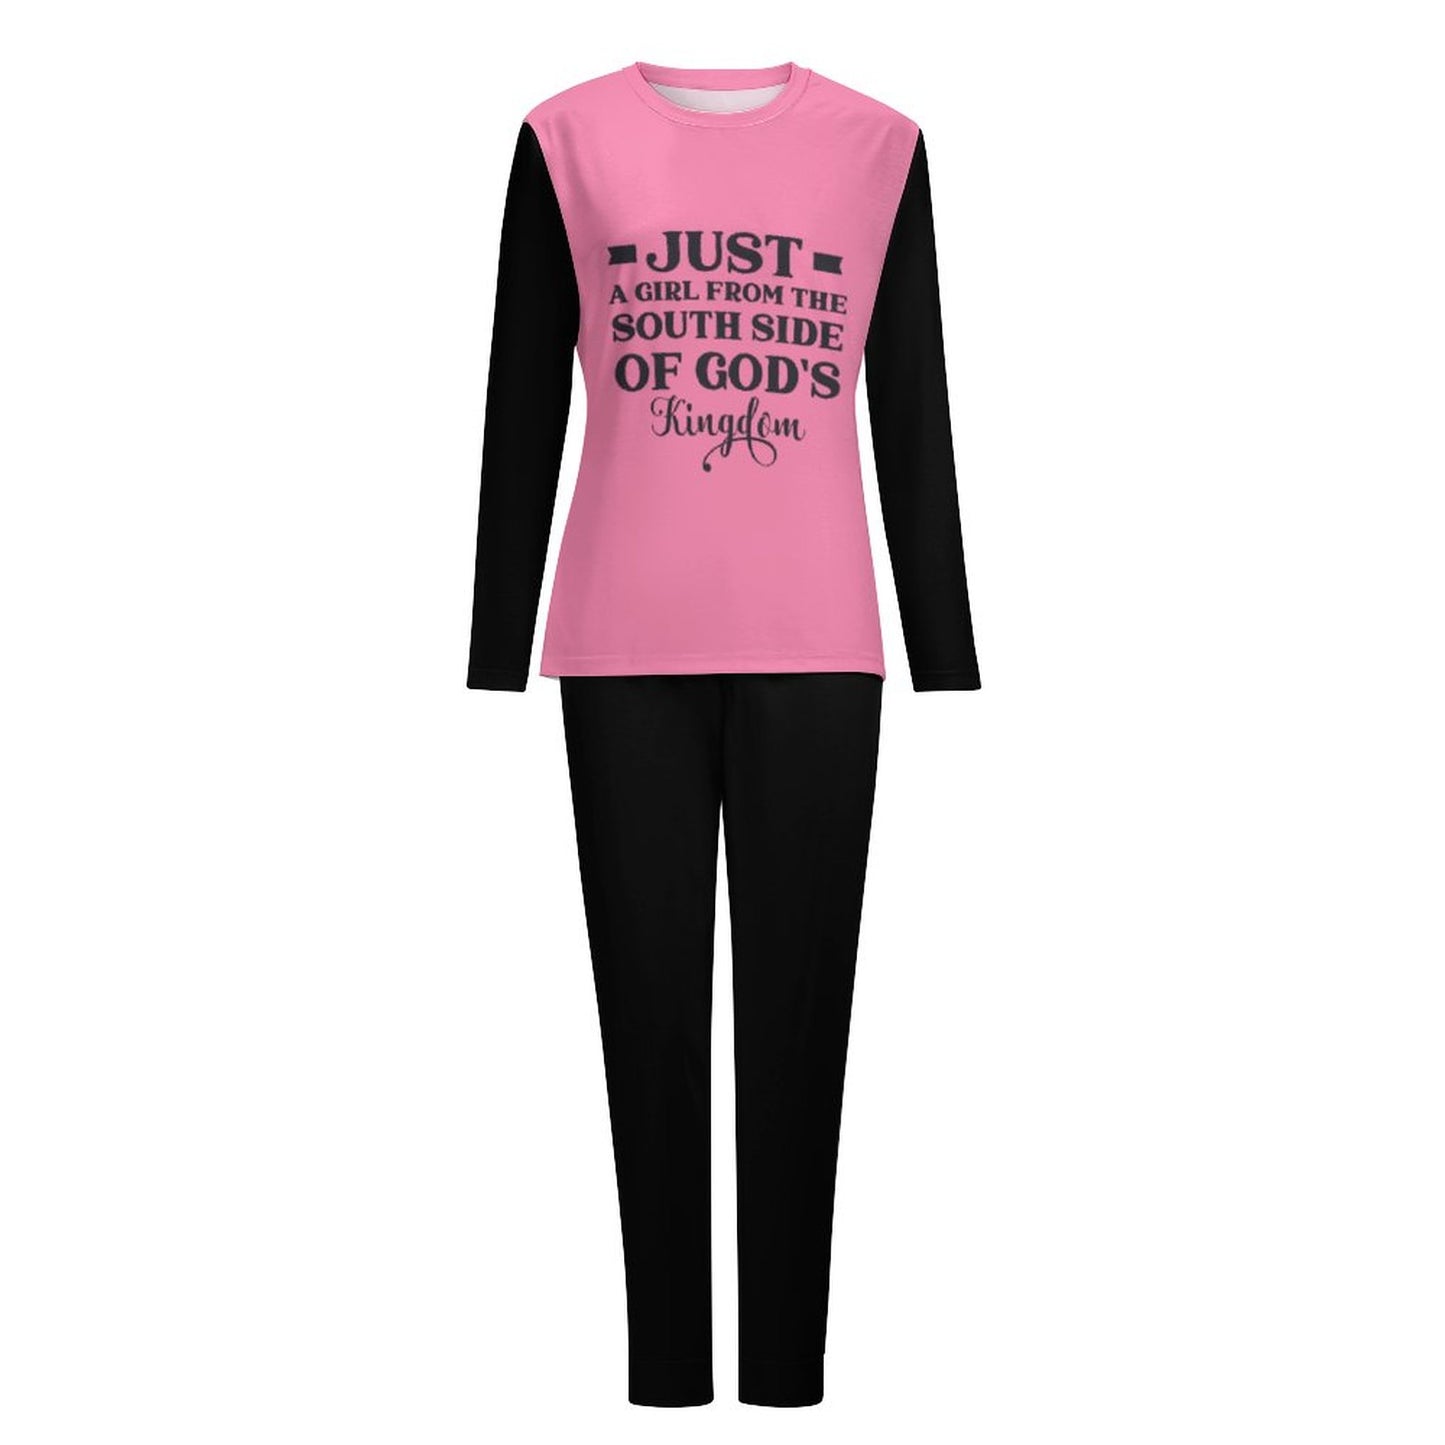 Just A Girl From The South Side Of God's Kingdom Women's Christian Pajamas